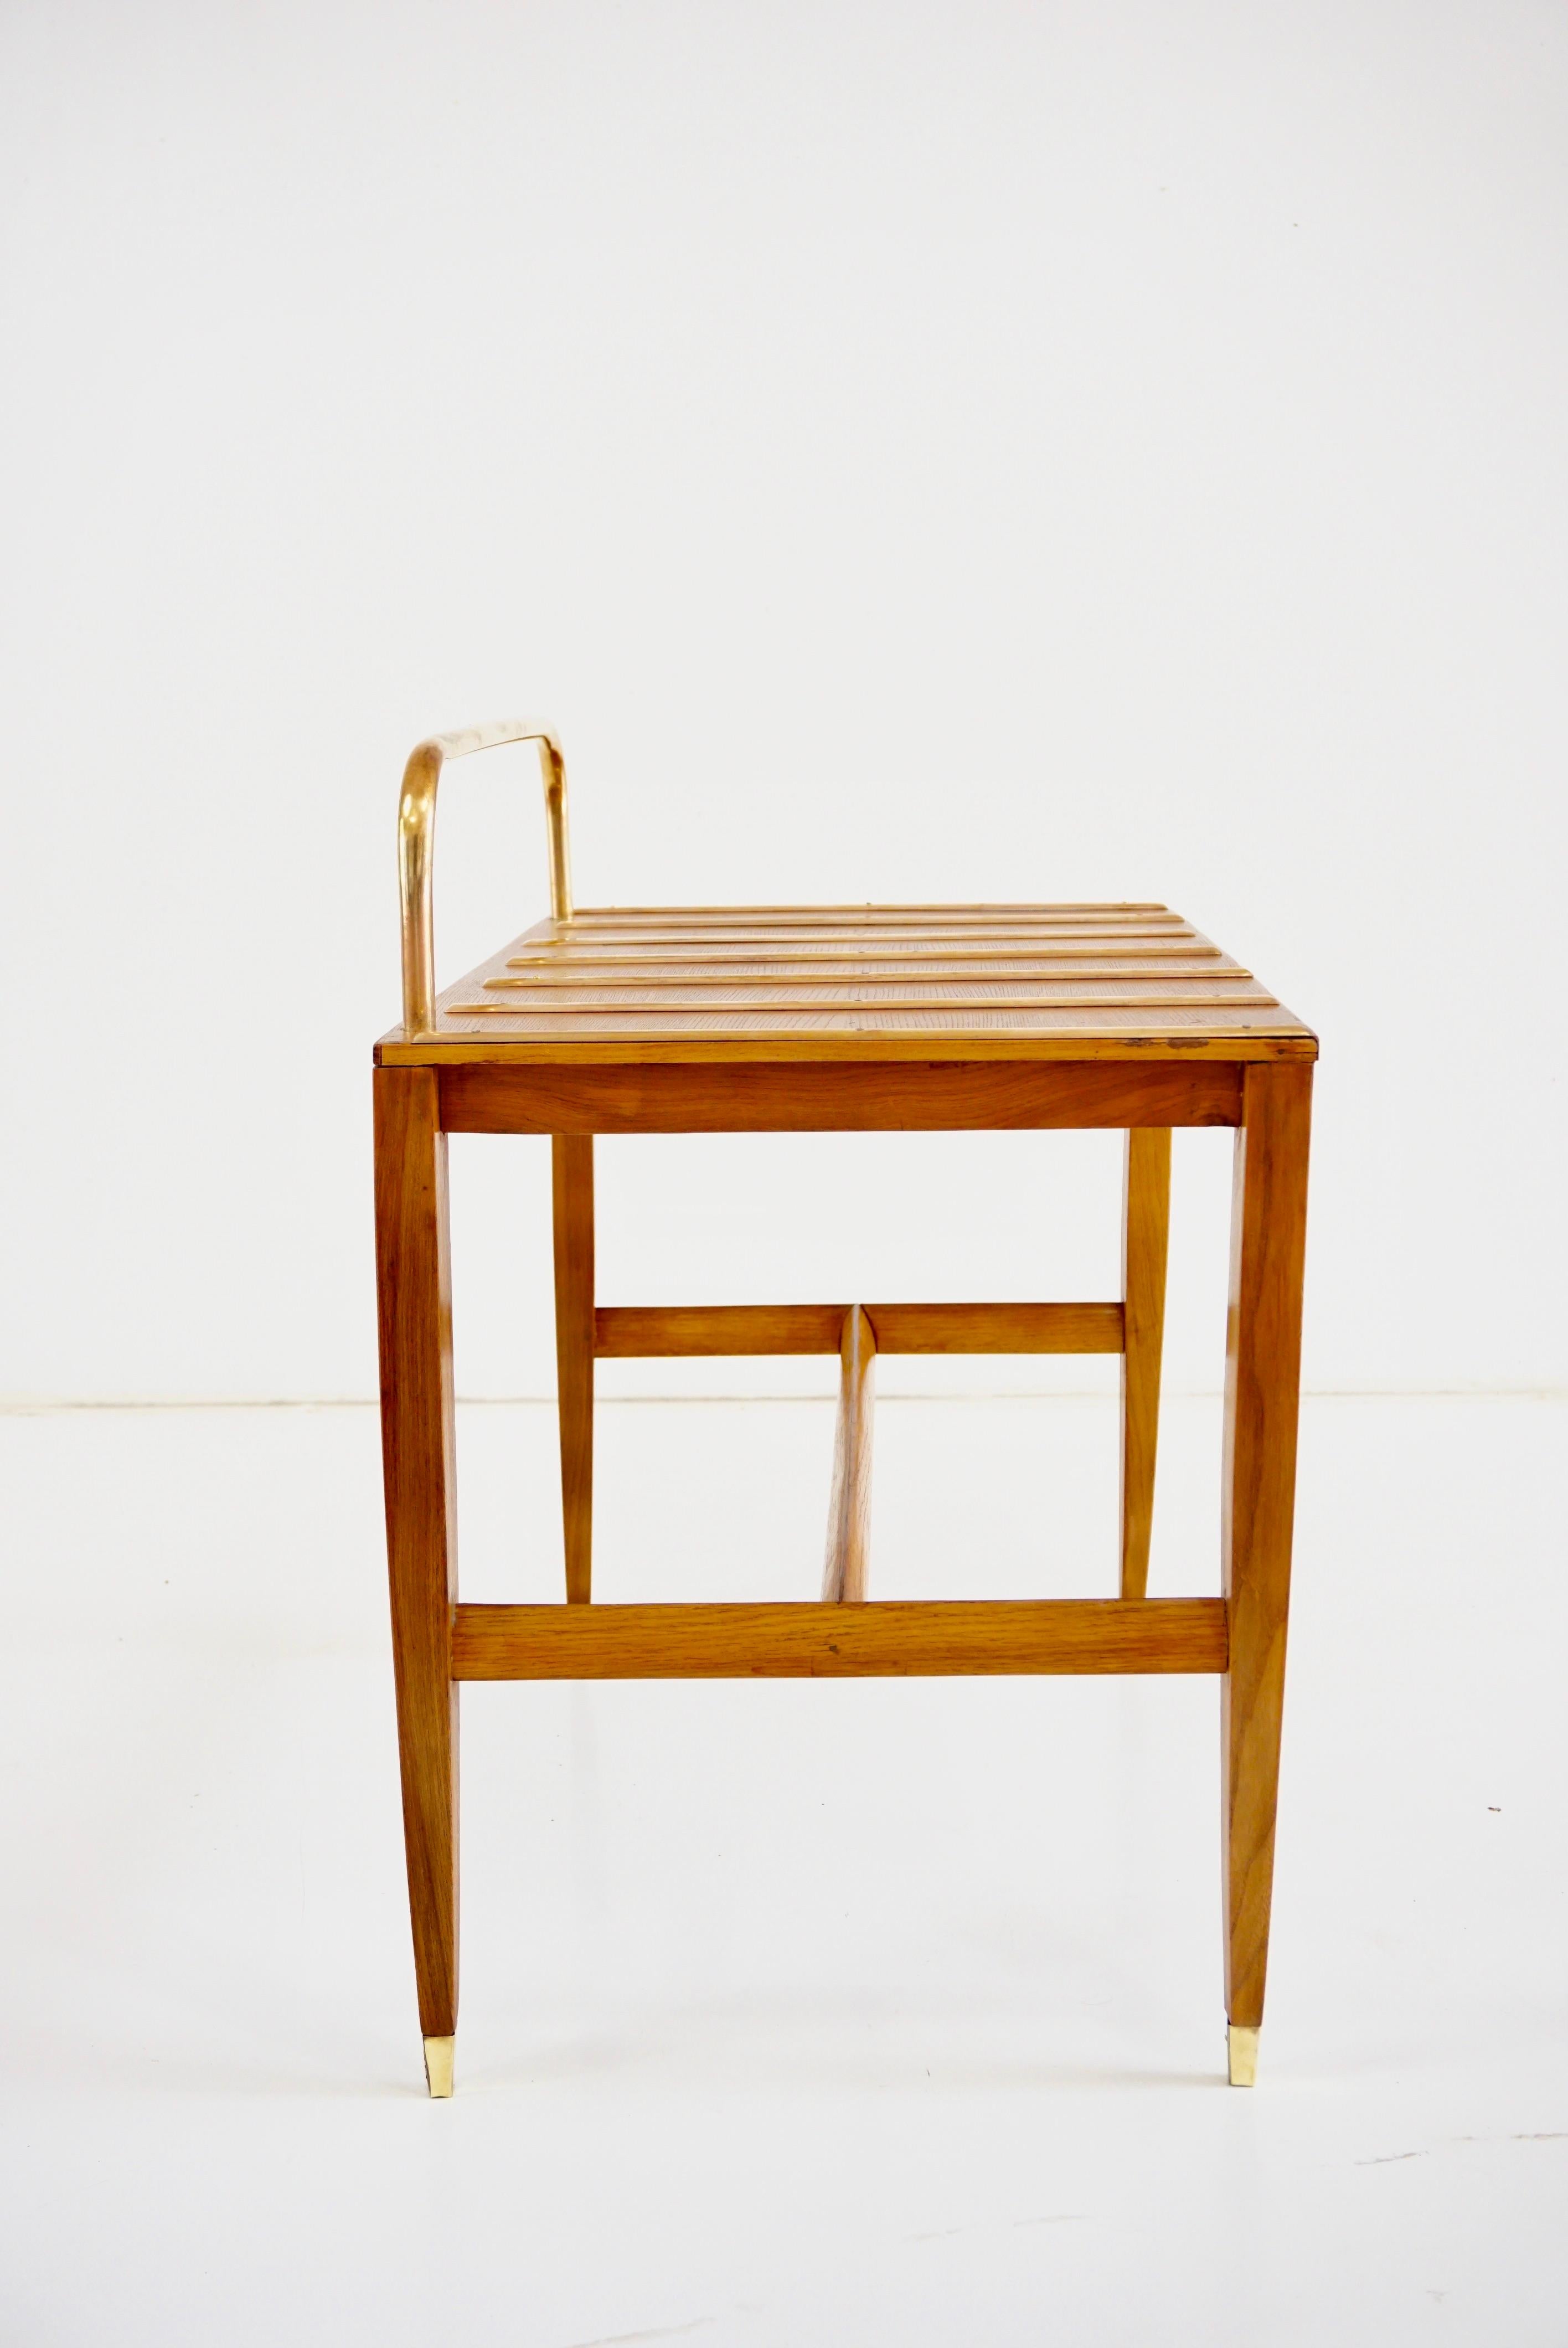 Gio Ponti Walnut Side Table, Luggage Rack for Hotel Royal Naples, 1955 For Sale 2